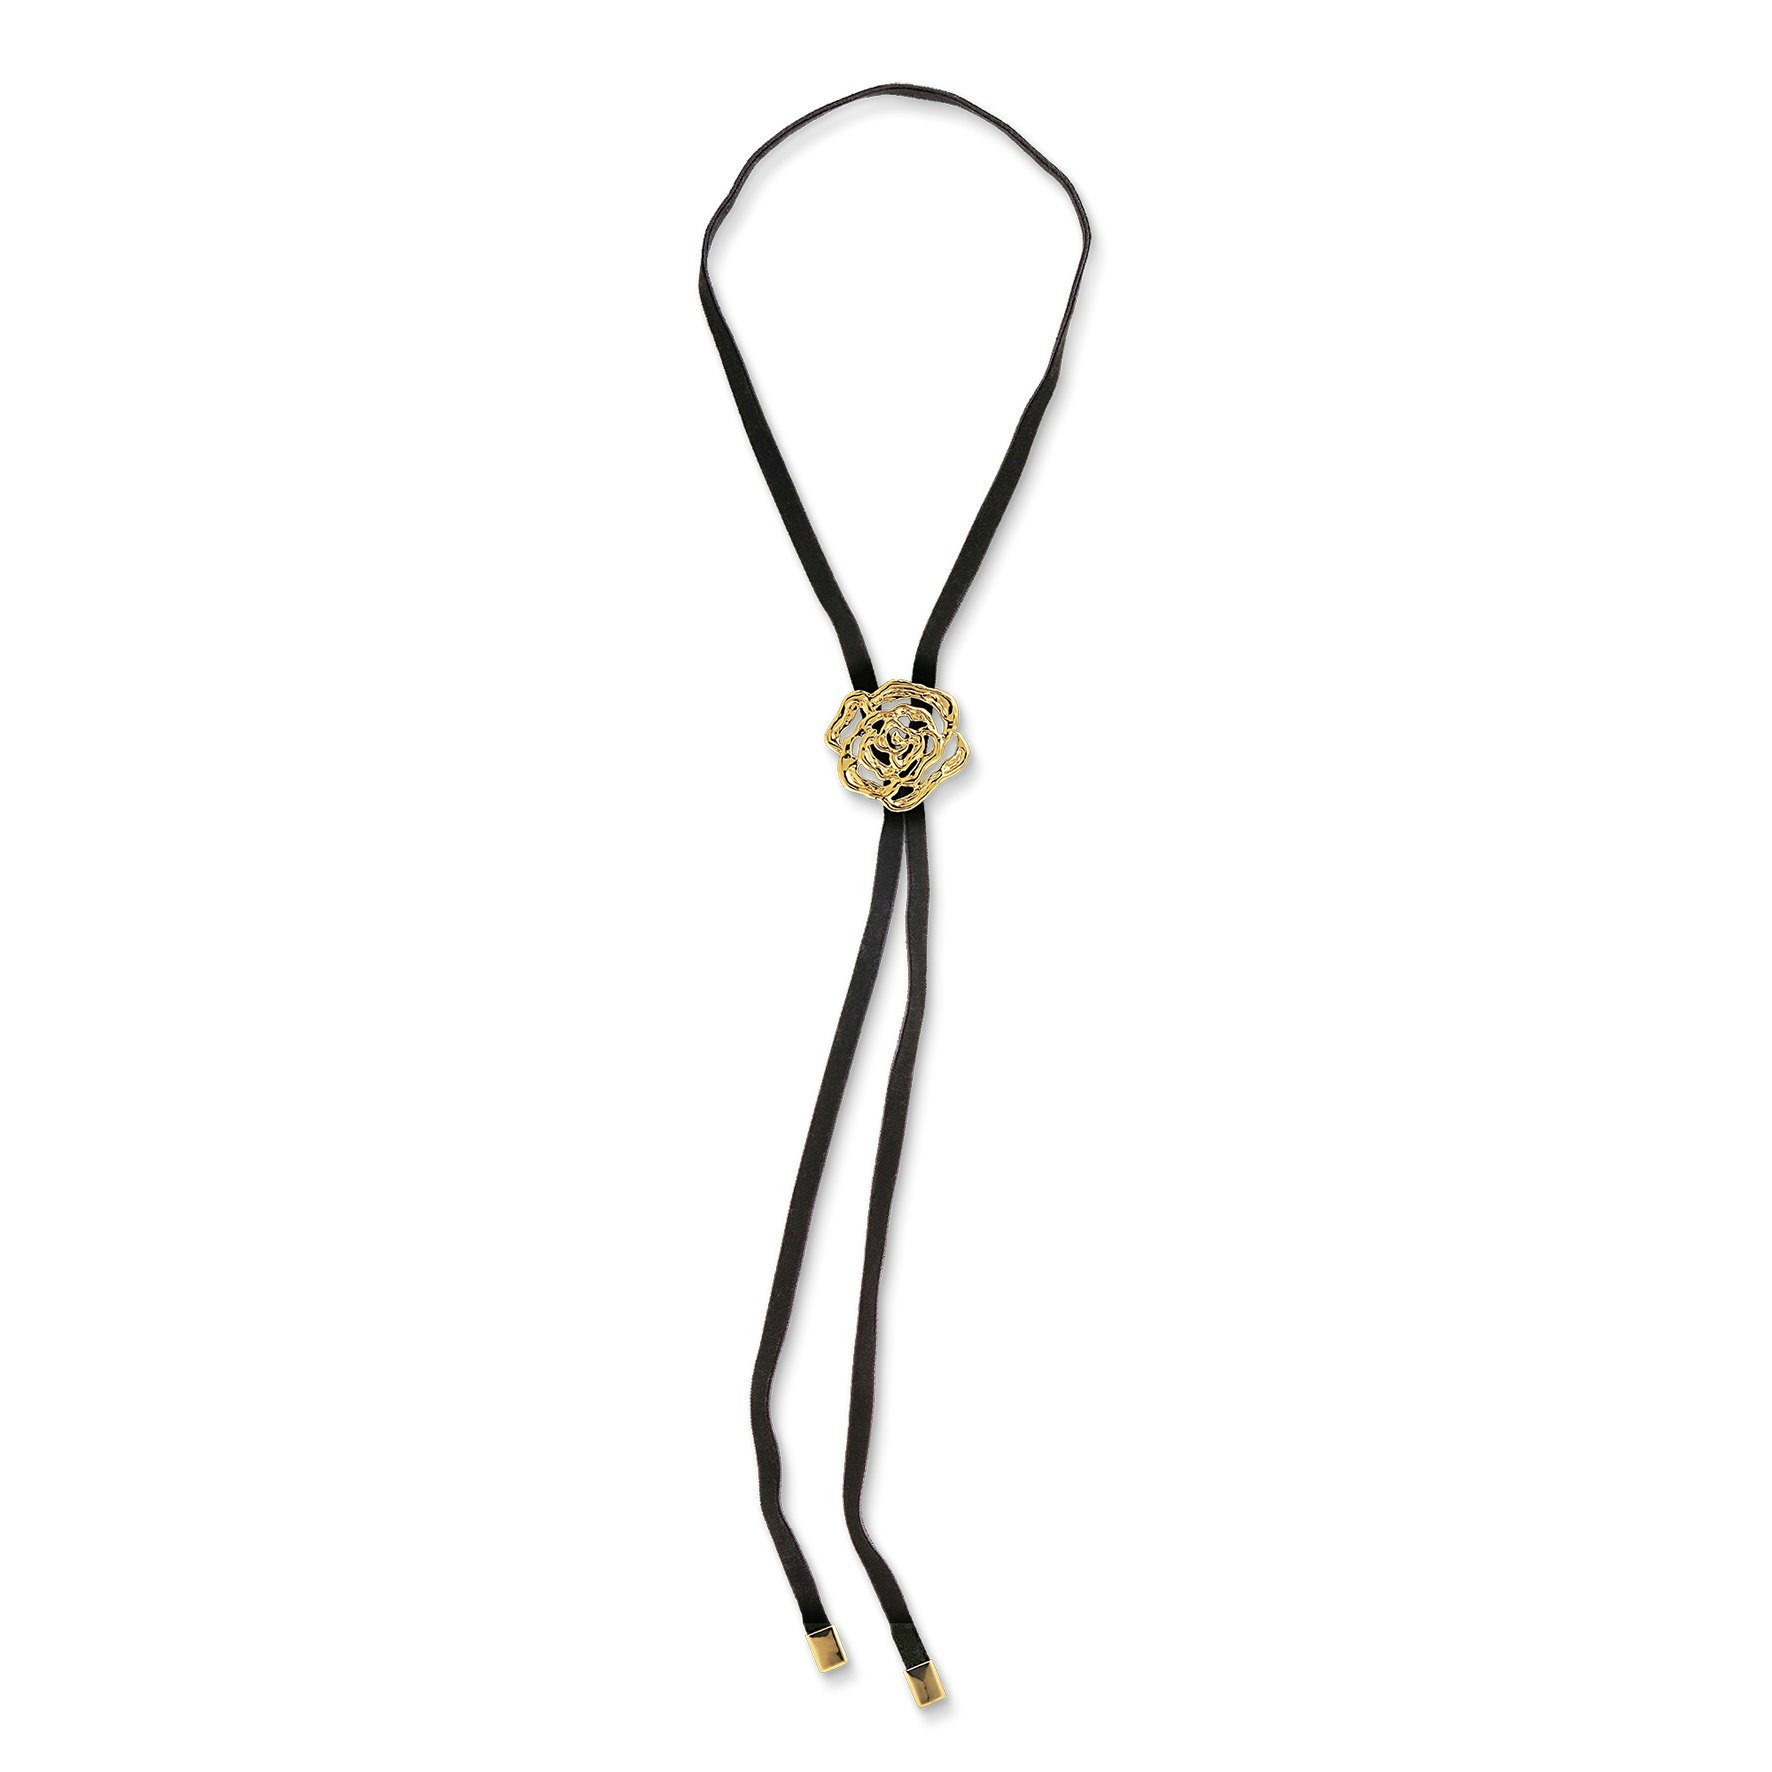 Rosle Bolo Tie Necklace from Jane Kønig in Goldplated Silver Sterling 925